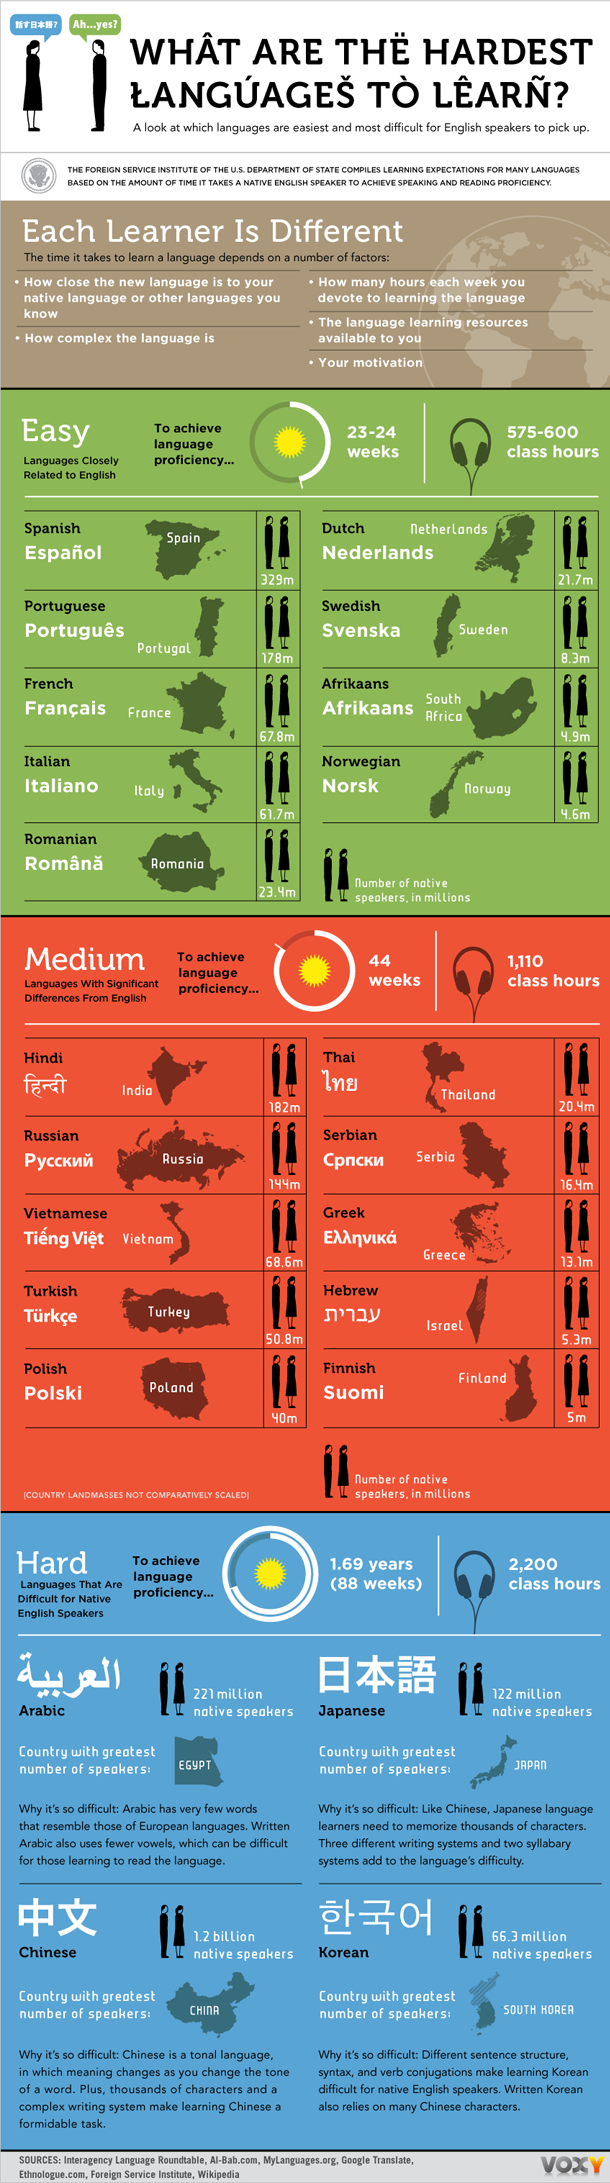 24 Incredible Infographics That Will Blow Your Mind...